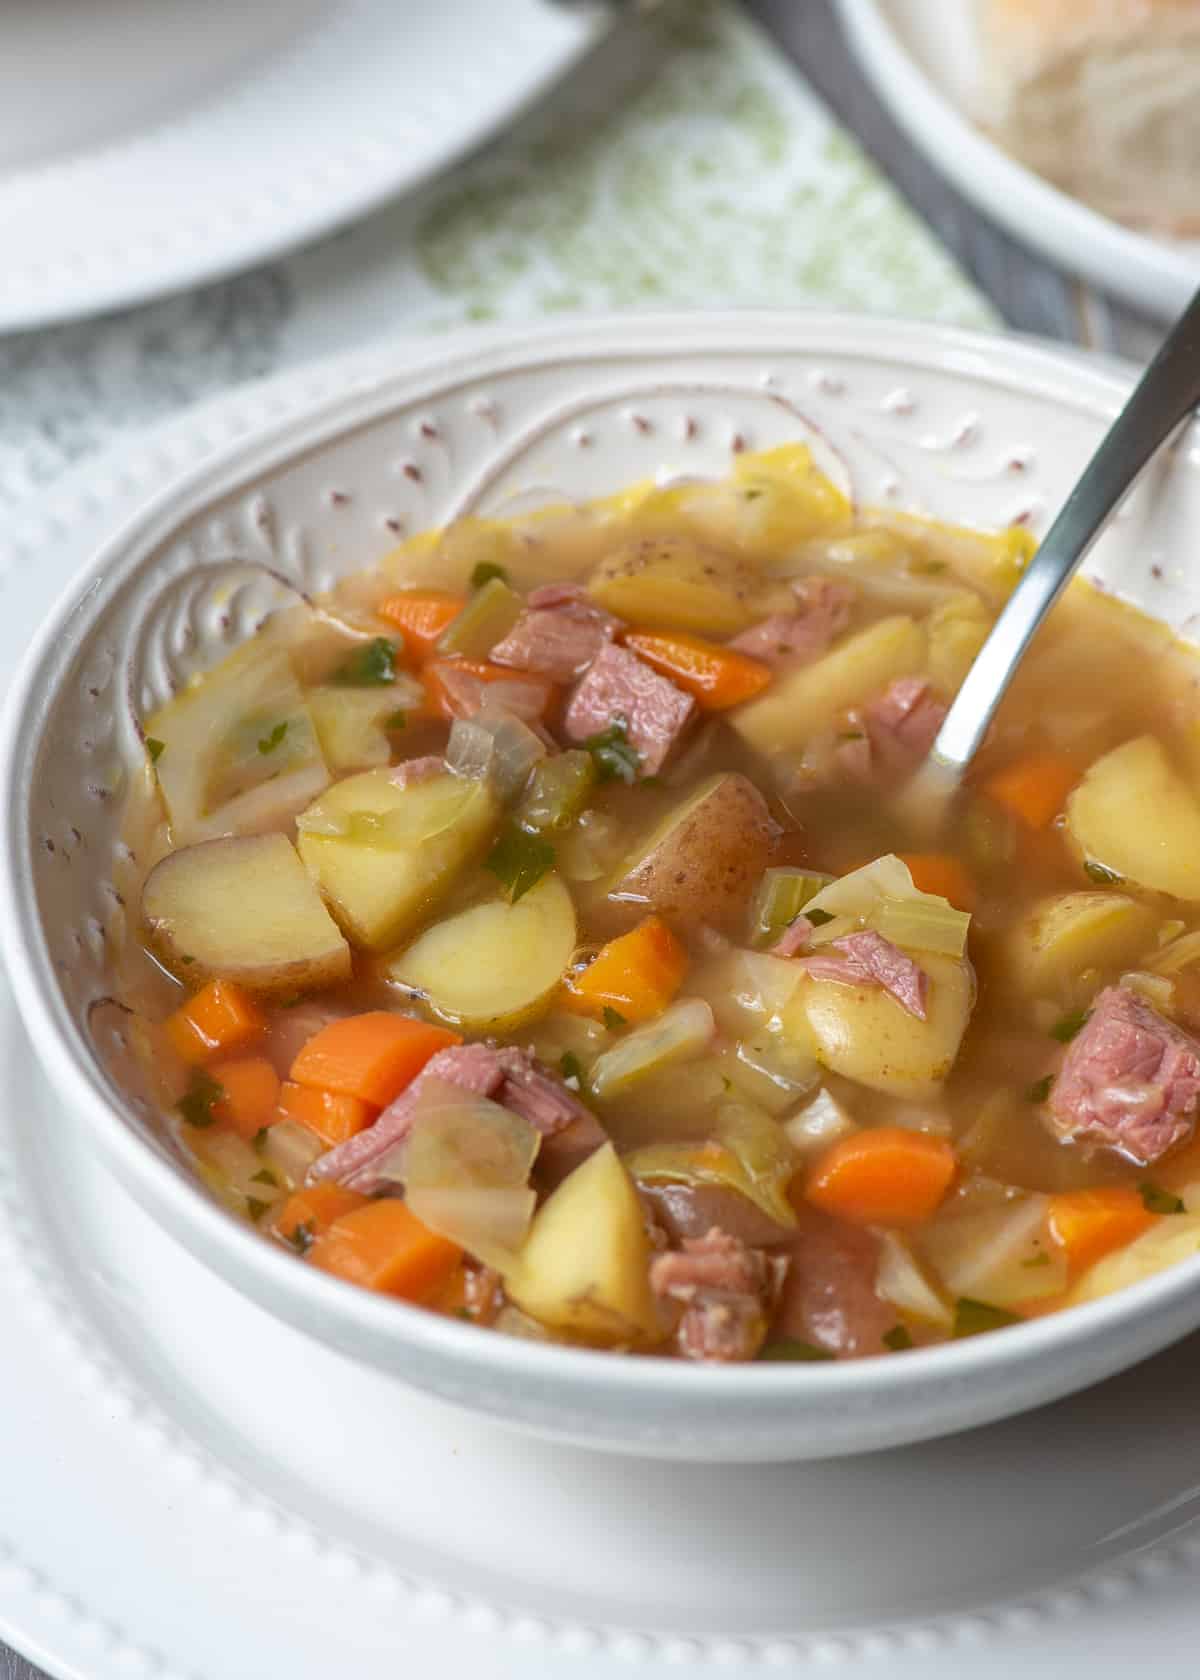 A spoon resting in a bowl of corned beef and cabbage soup.